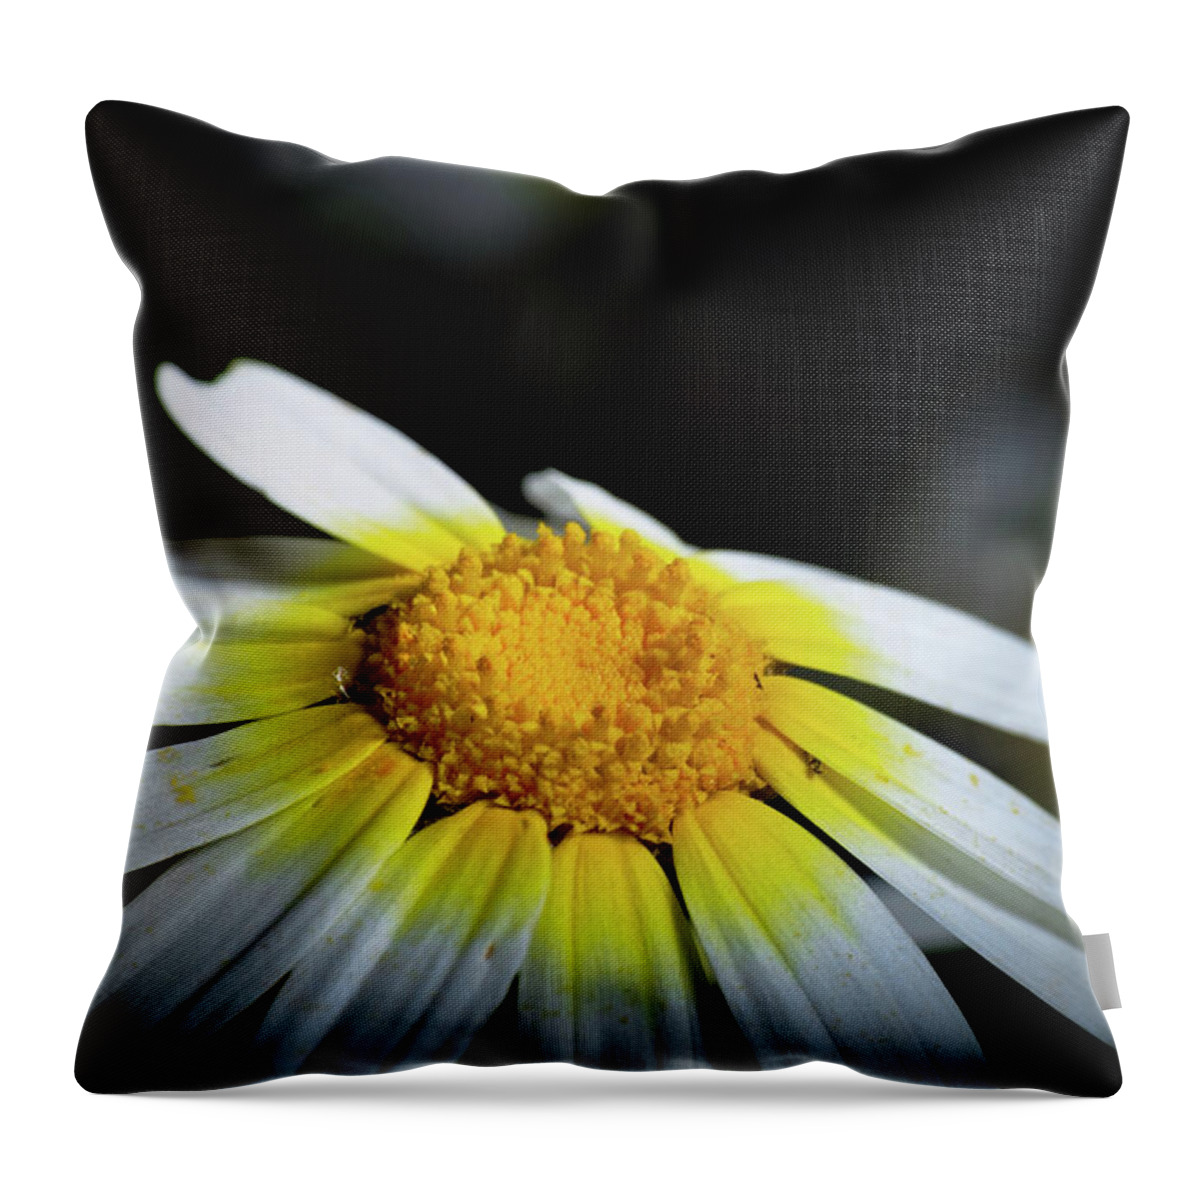 Daisy Flower Throw Pillow featuring the photograph Wild Daisy Flower by Angelo DeVal